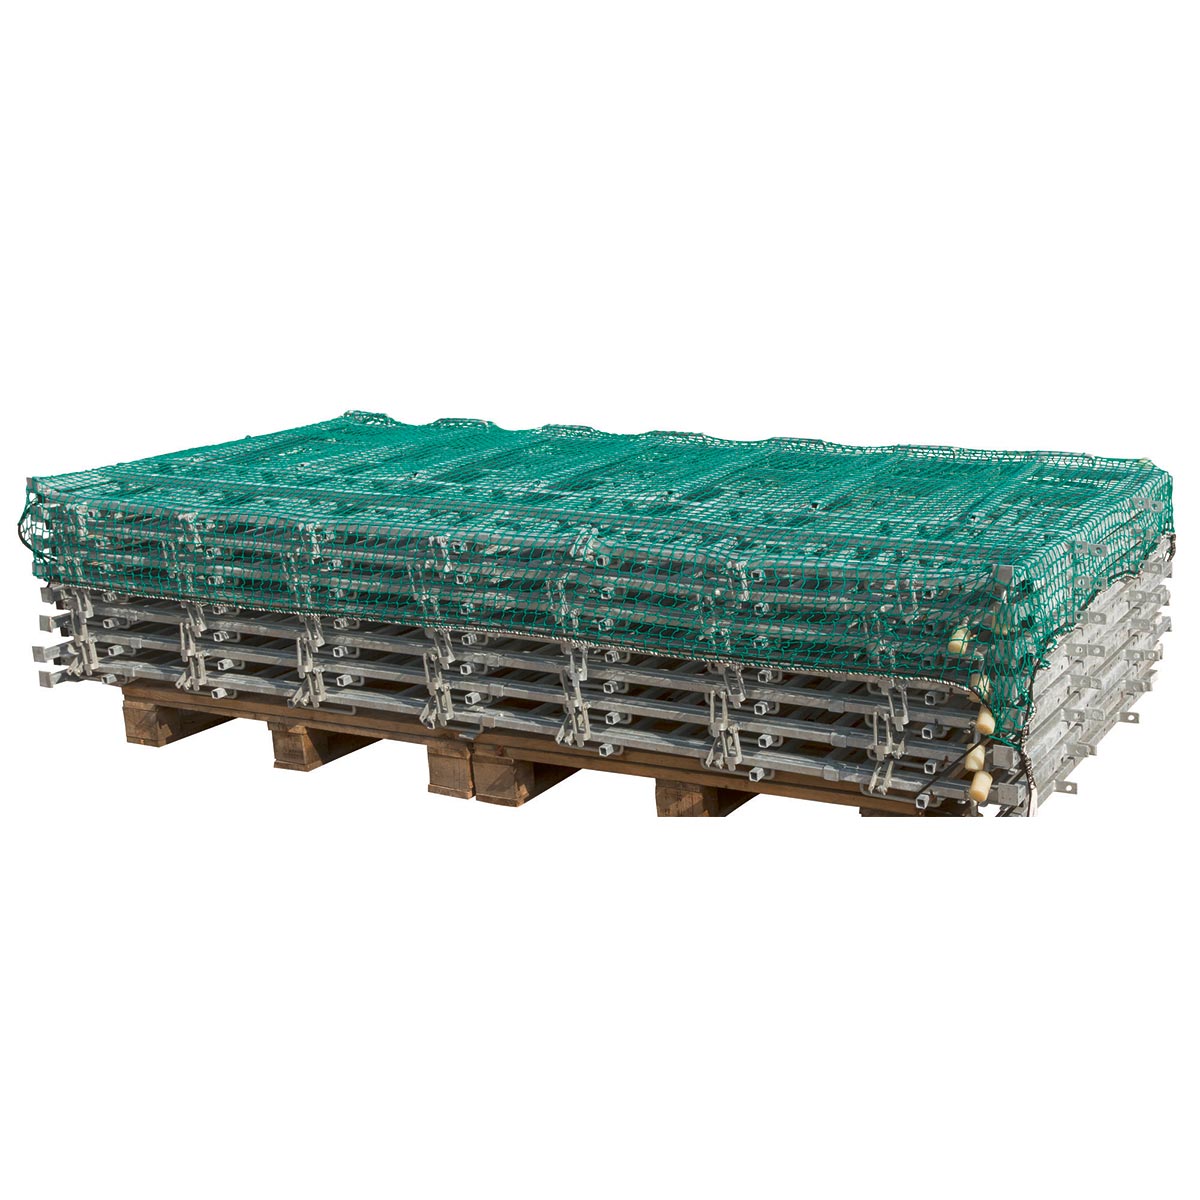 Load protection net SafeNet 2,5 x 1,6 m